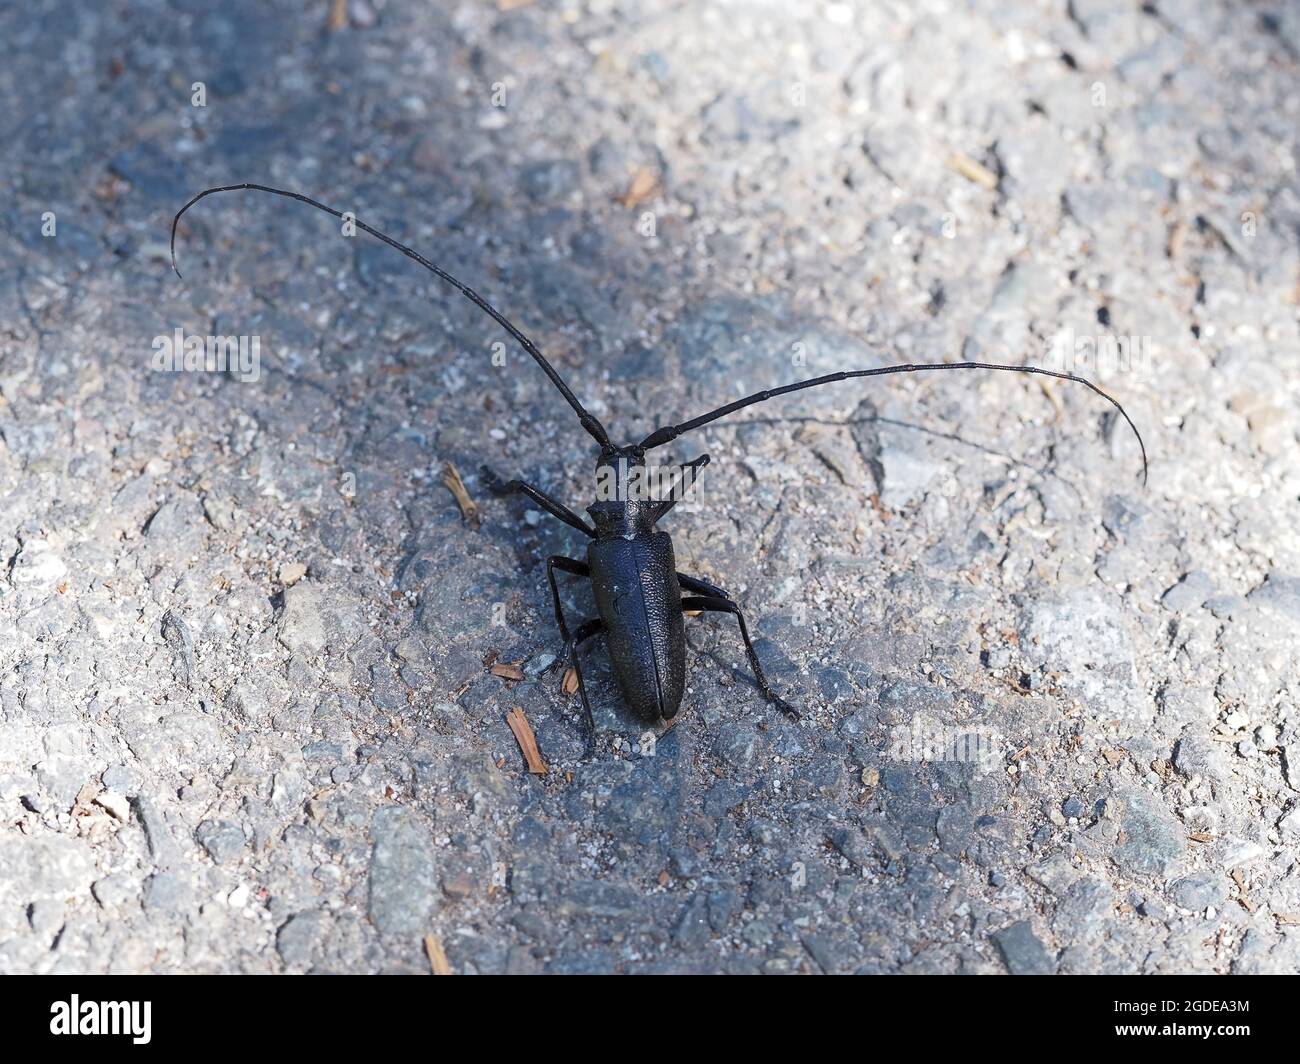 Monochamus scutellatus - white-spotted sawyer beetle - about 5cm in length excluding antennas Stock Photo